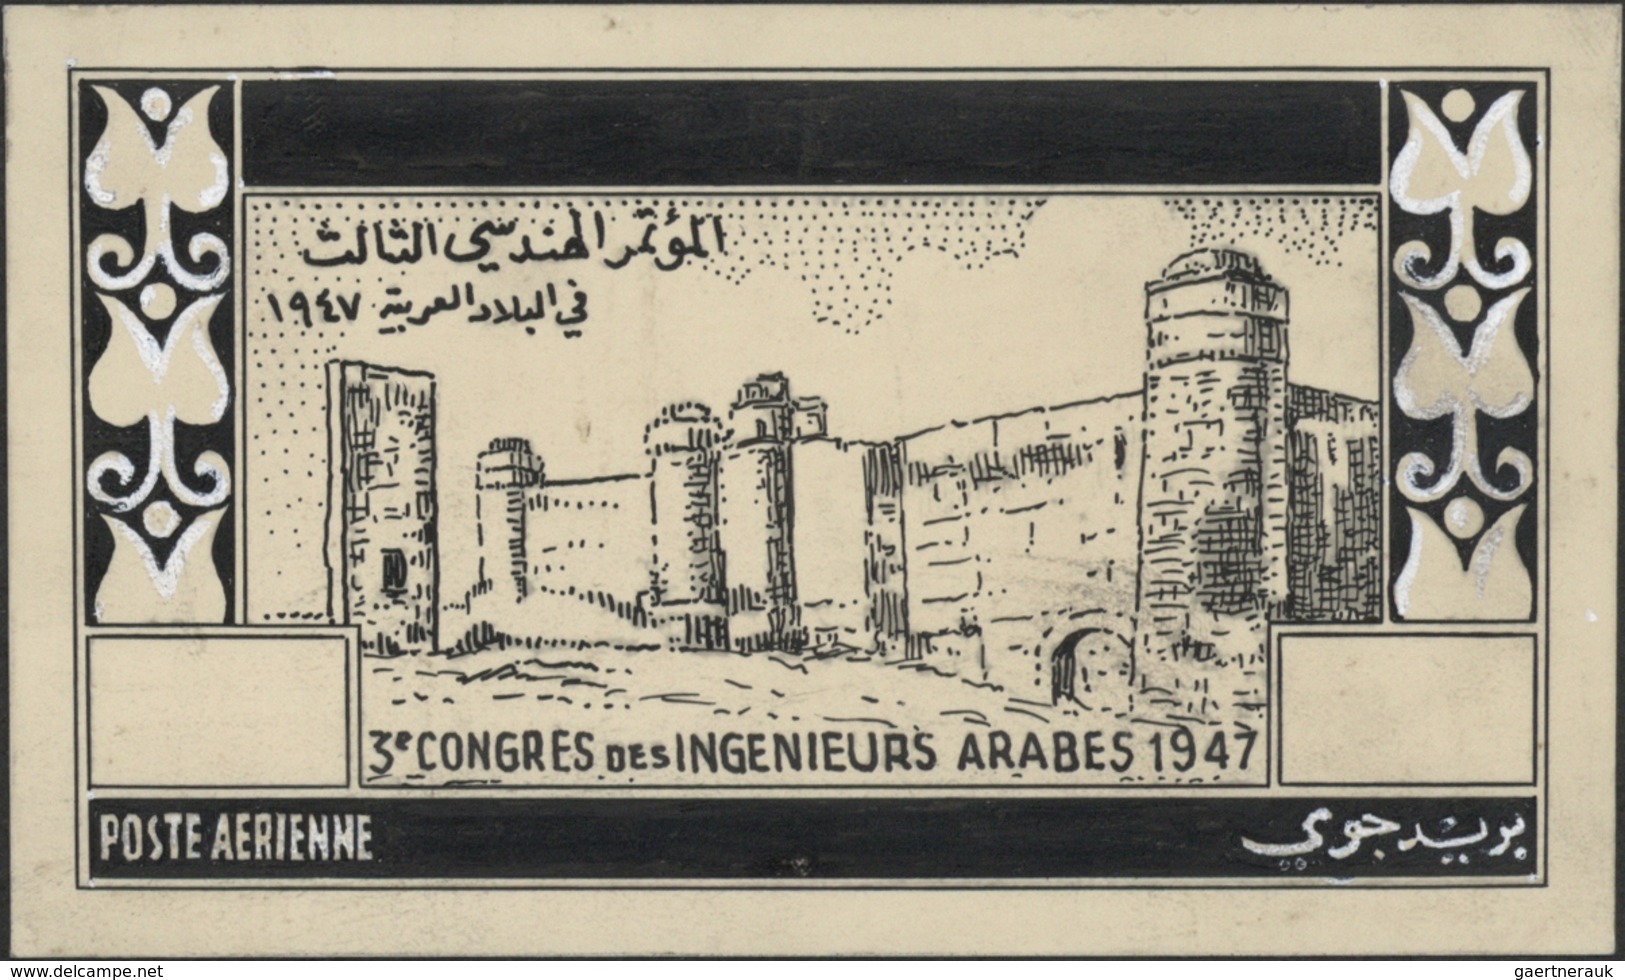 Syrien: 1938/1955. Astonishing collection of 56 ARTIST'S DRAWINGS for stamps of the named period, st